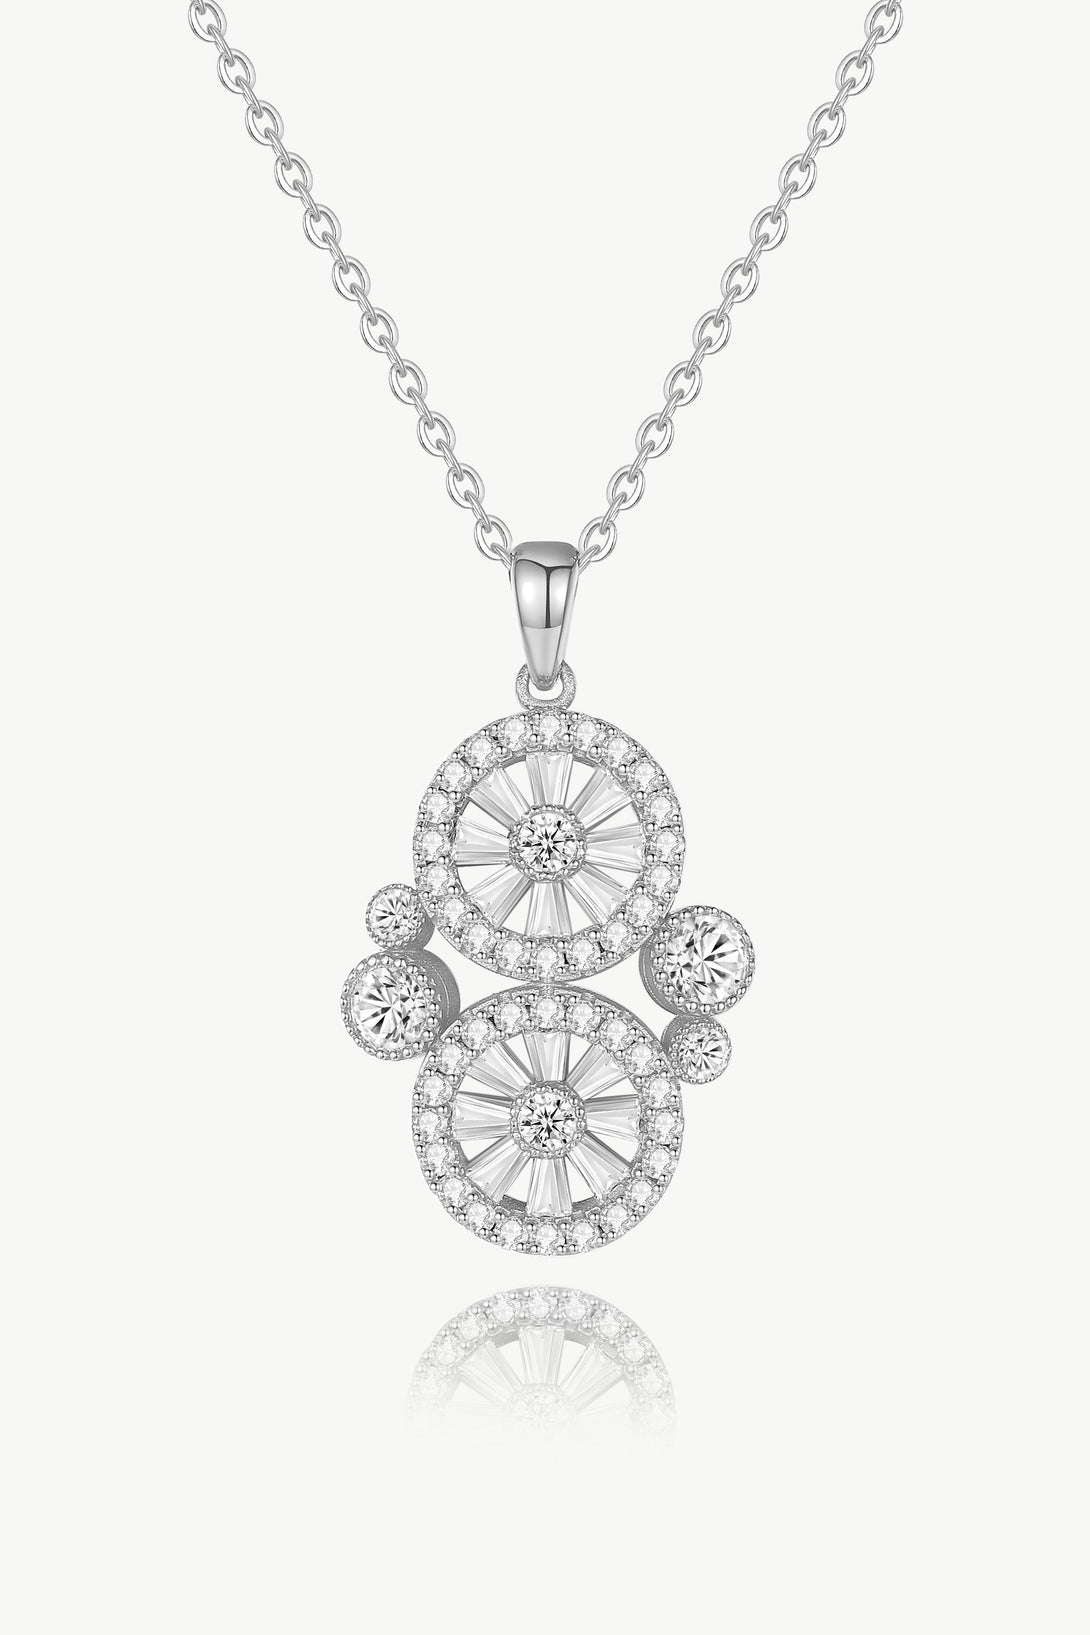 Silver Wheel of Fortune Necklace - Classicharms